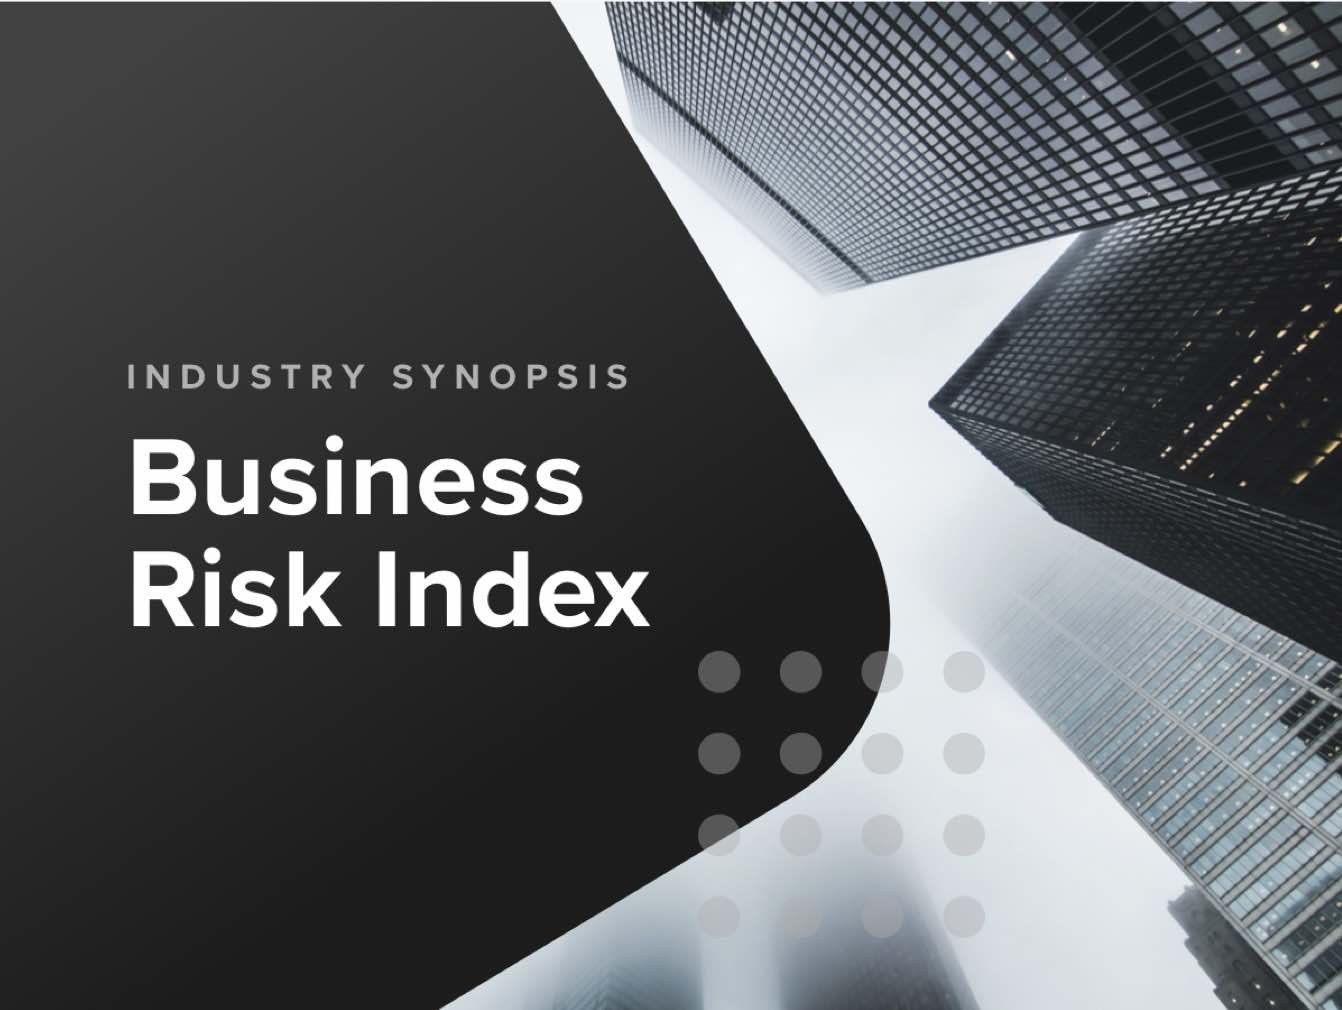 Industry Synopsis - Business Risk Index